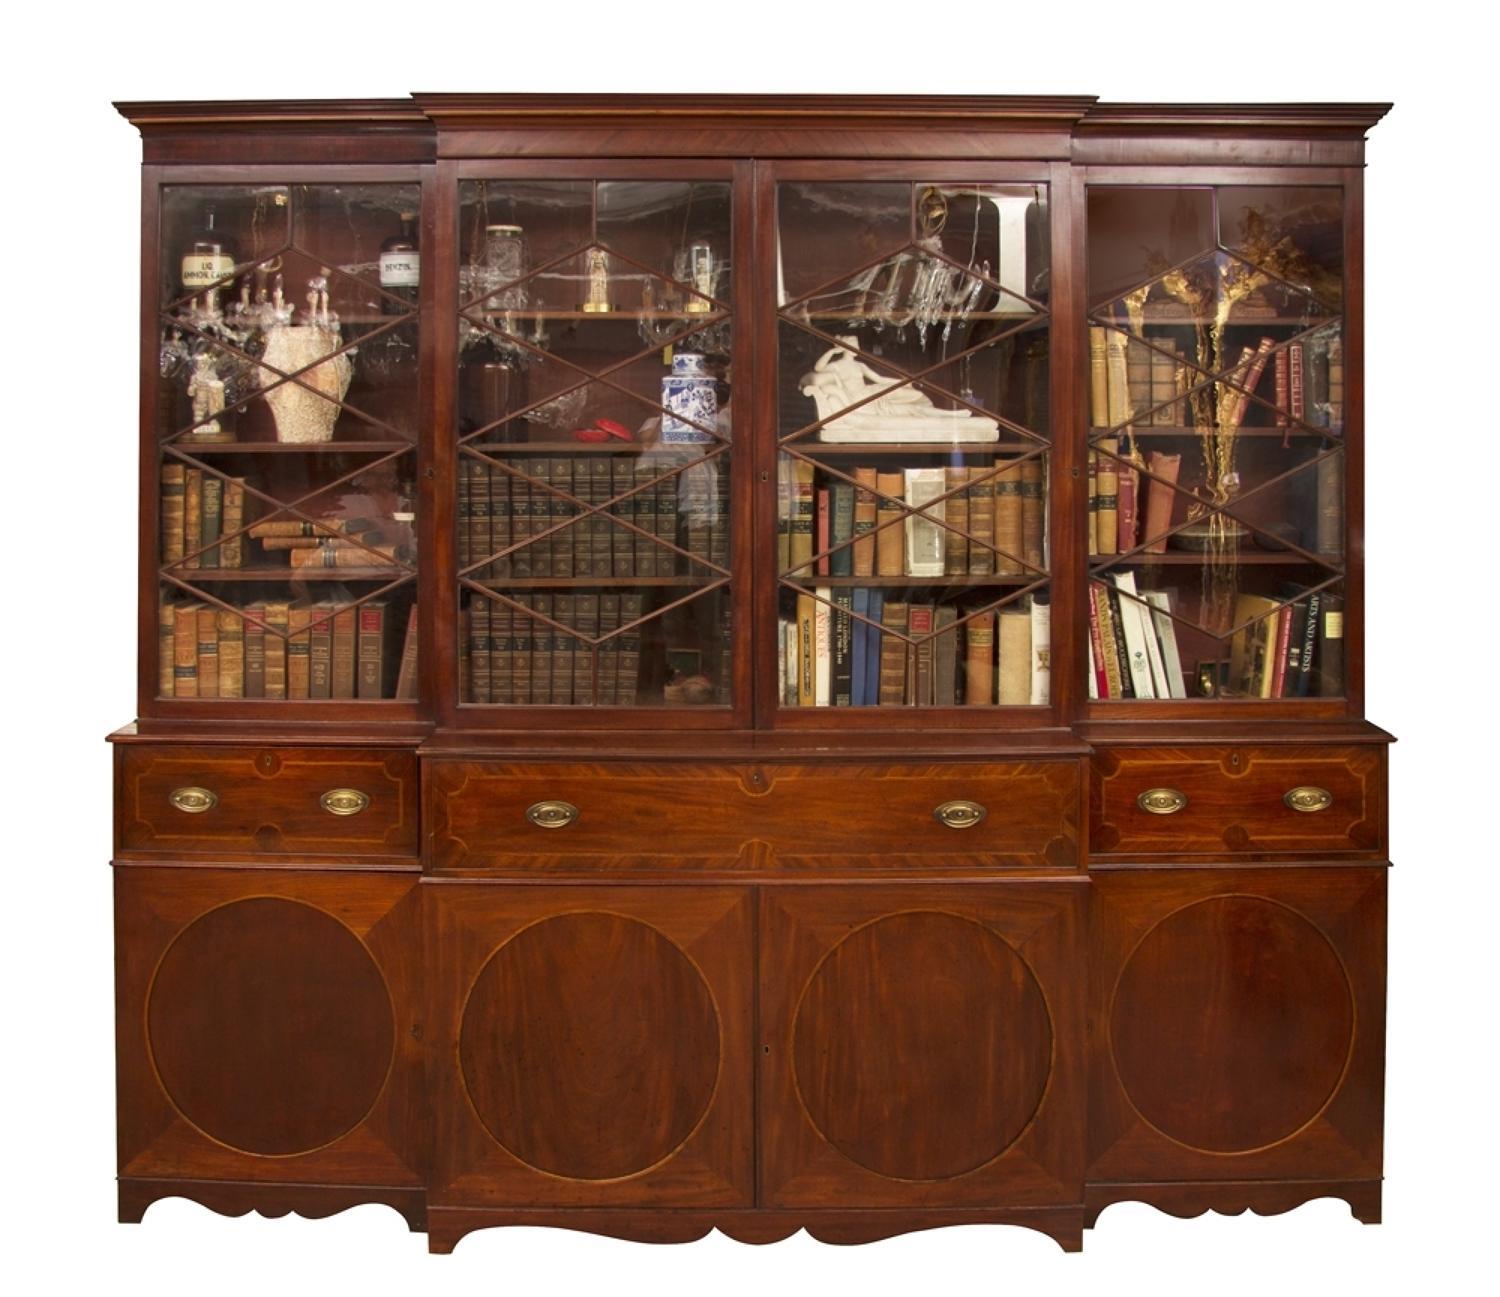 A George III Mahogany breakfront secretaire bookcase, circa 1780

A George III Mahogany breakfront secretaire bookcase. A wonderful Georgian bookcase with the original patina, color and tone you would want. A really lovely piece proportionally